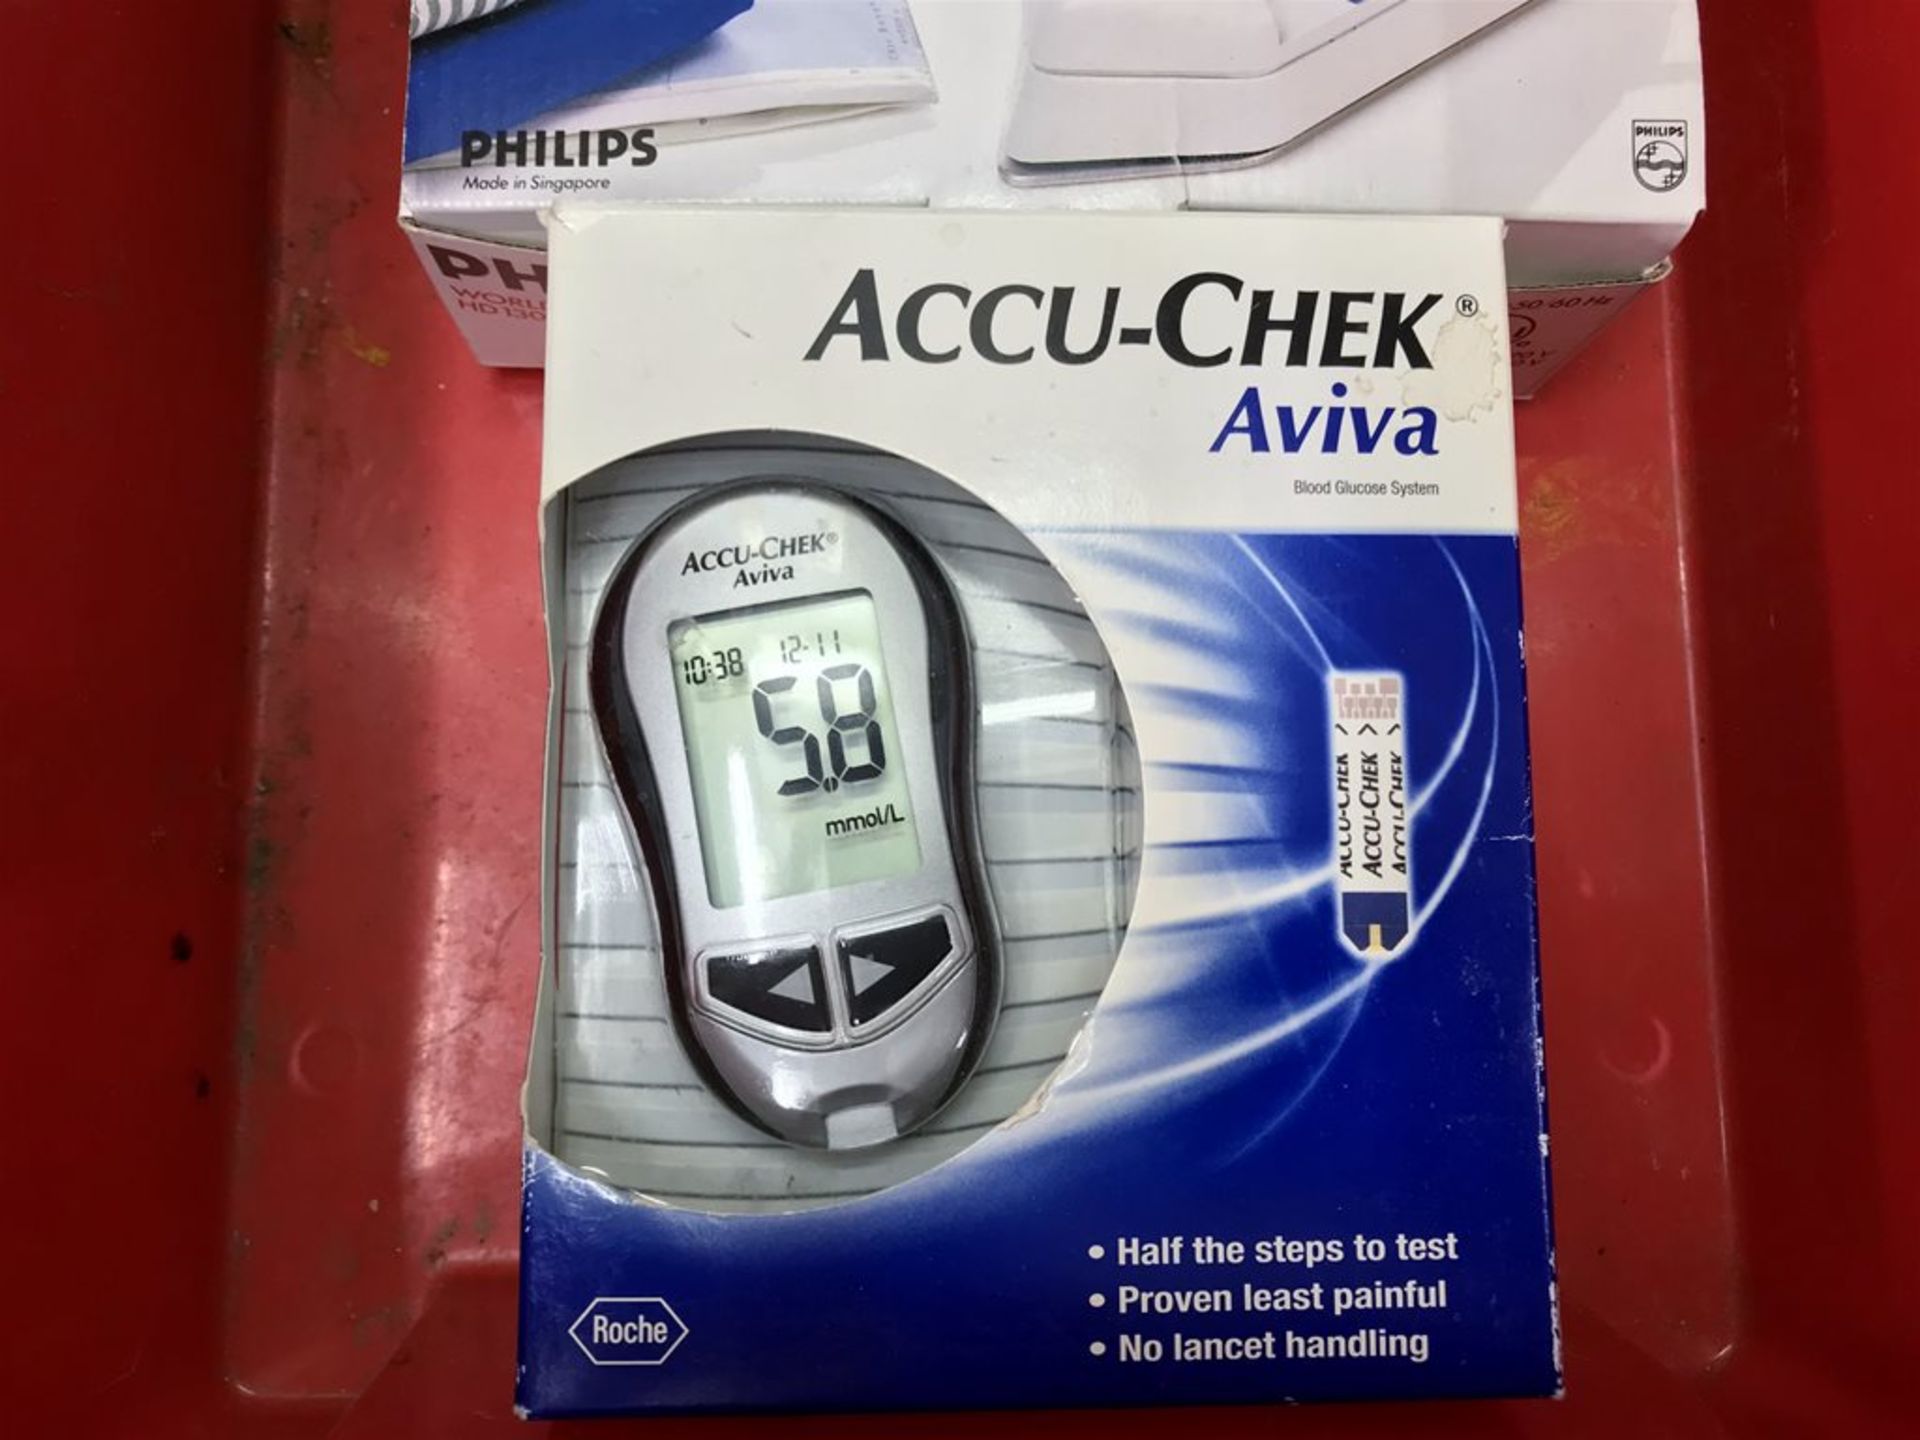 A Quantity of NEW Blood Glucose Testers and a Brand New Travel Iron - Image 4 of 4